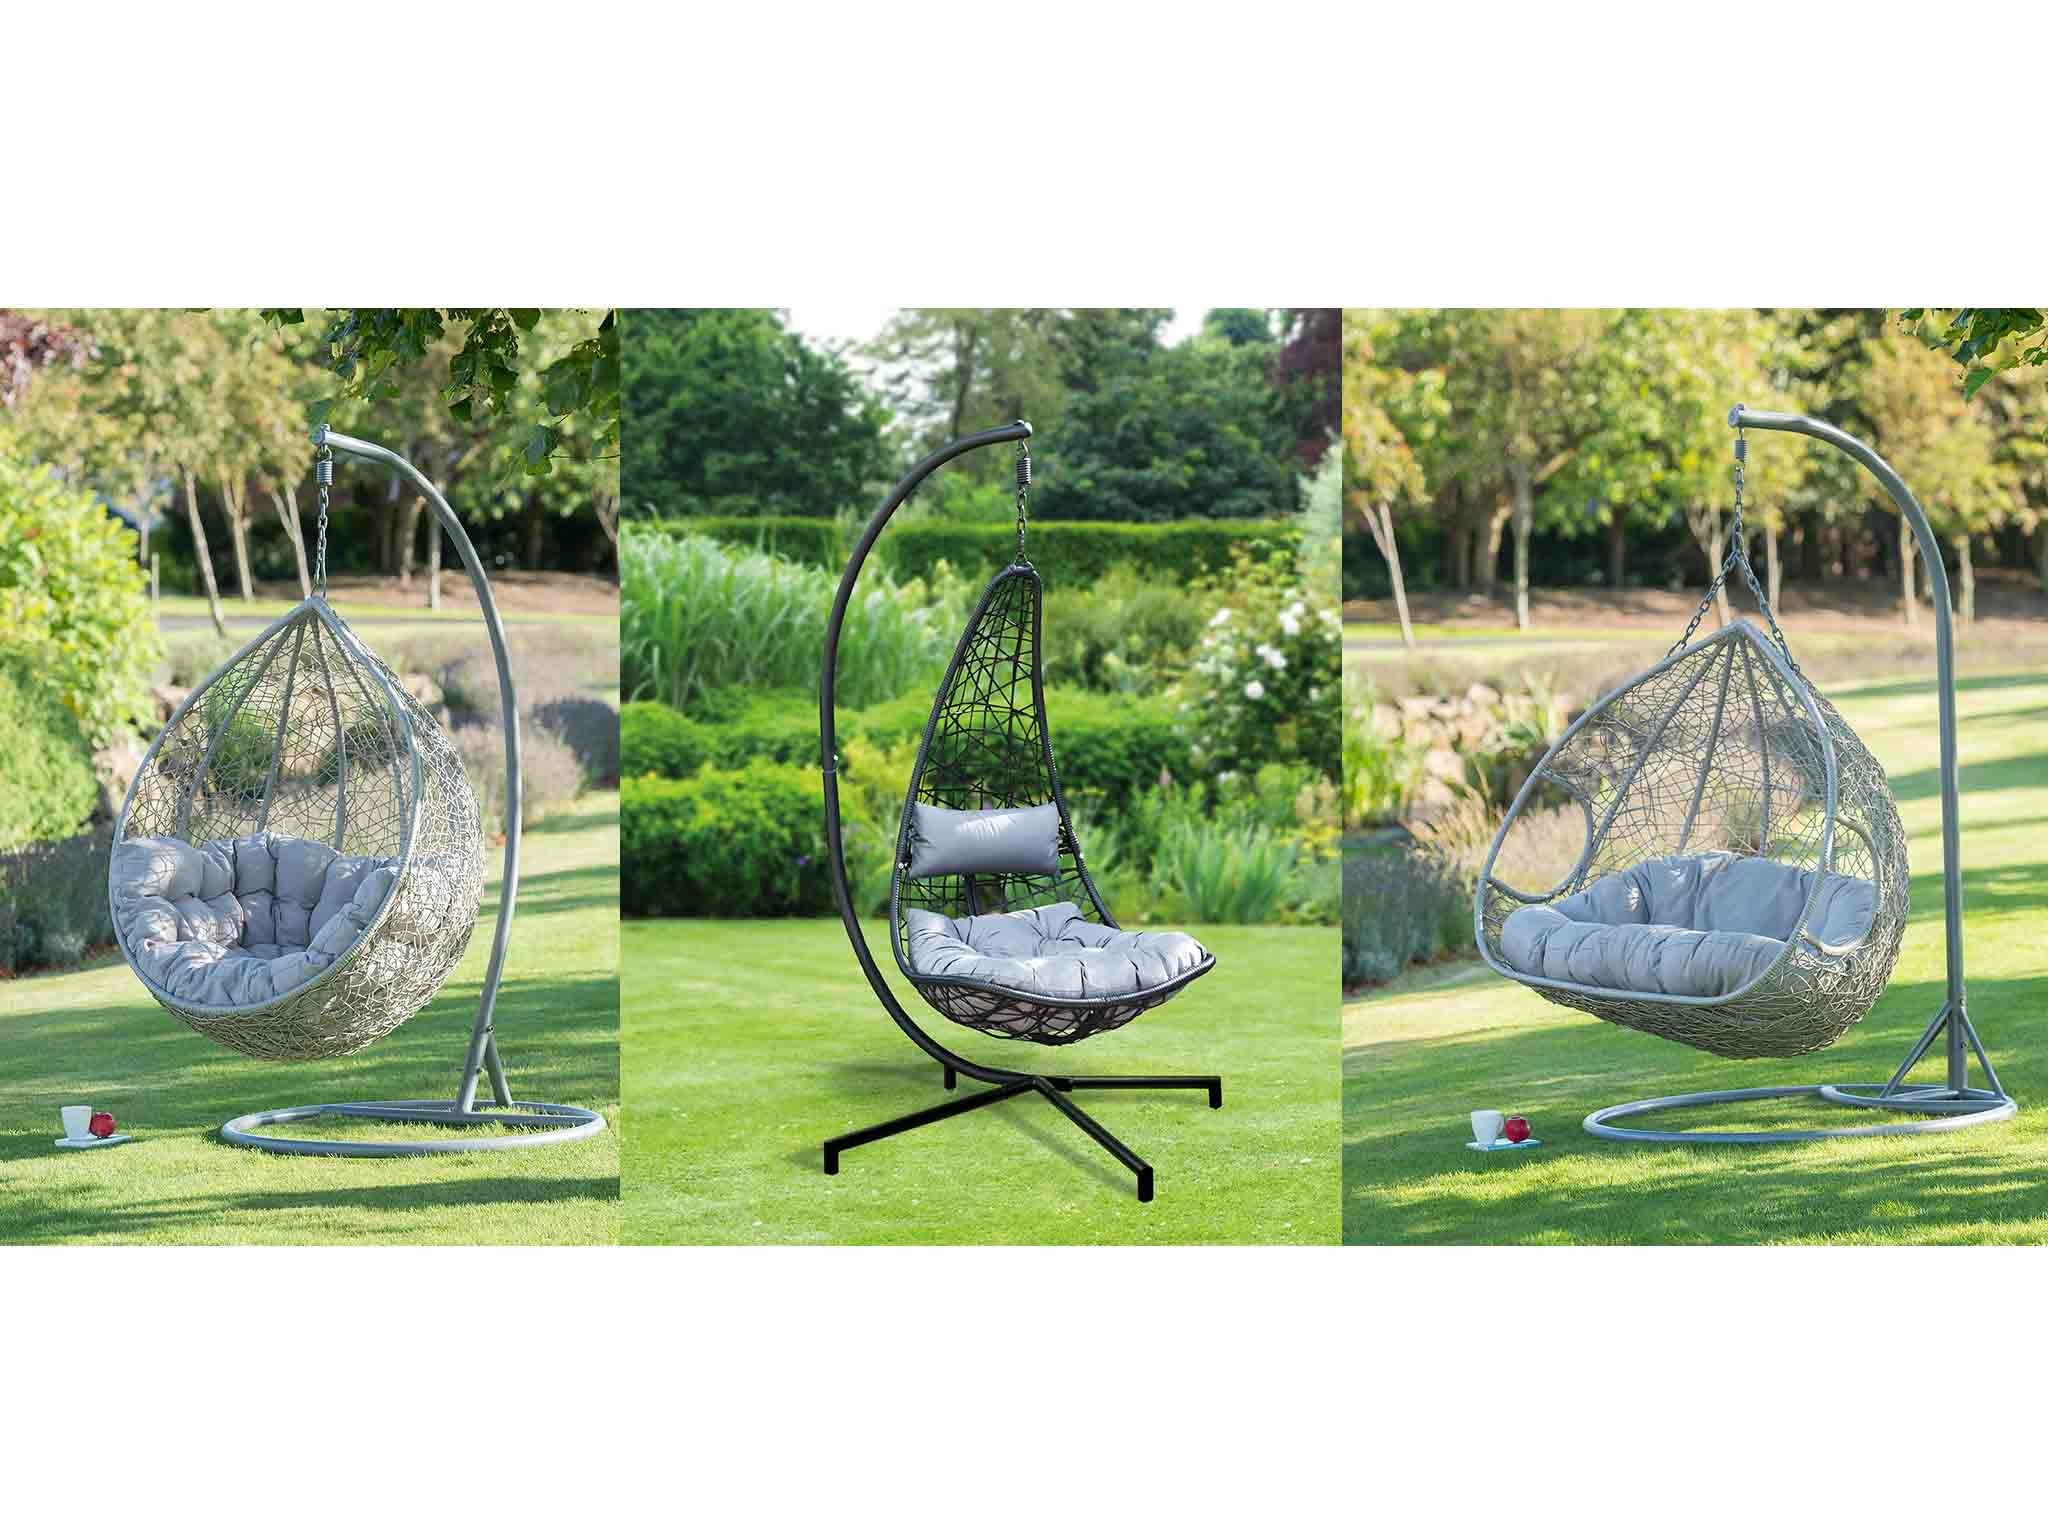 Snap up the original Siena, Siena snuggle double or New York slim line hanging egg chairs now